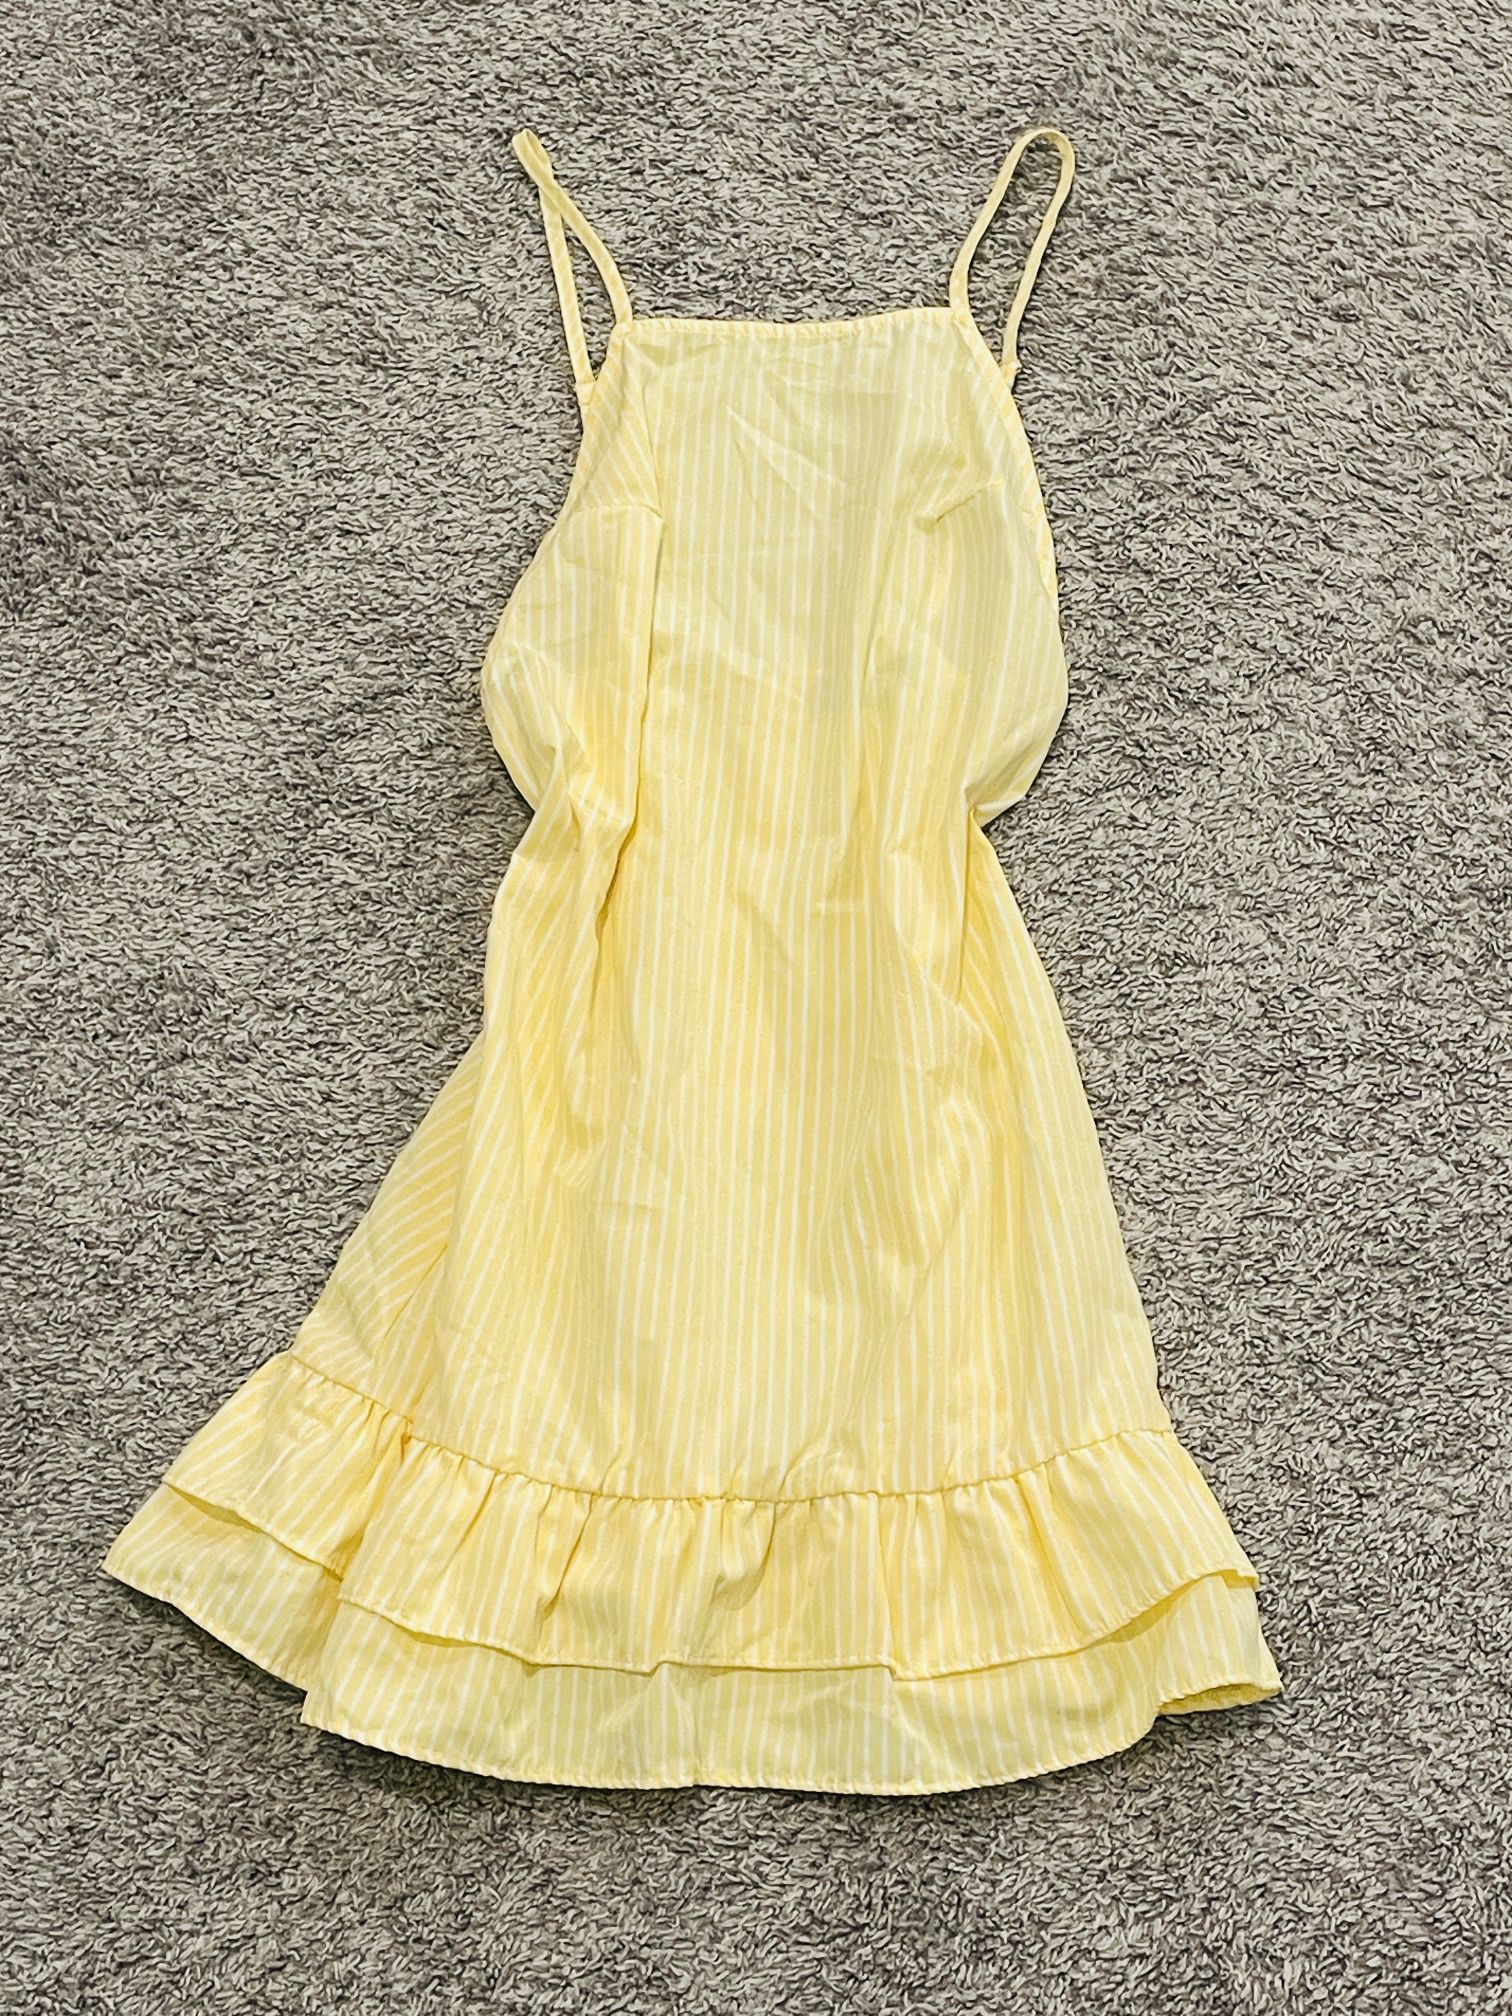 Pretty Little Thing Yellow And White Striped Dress Size 2